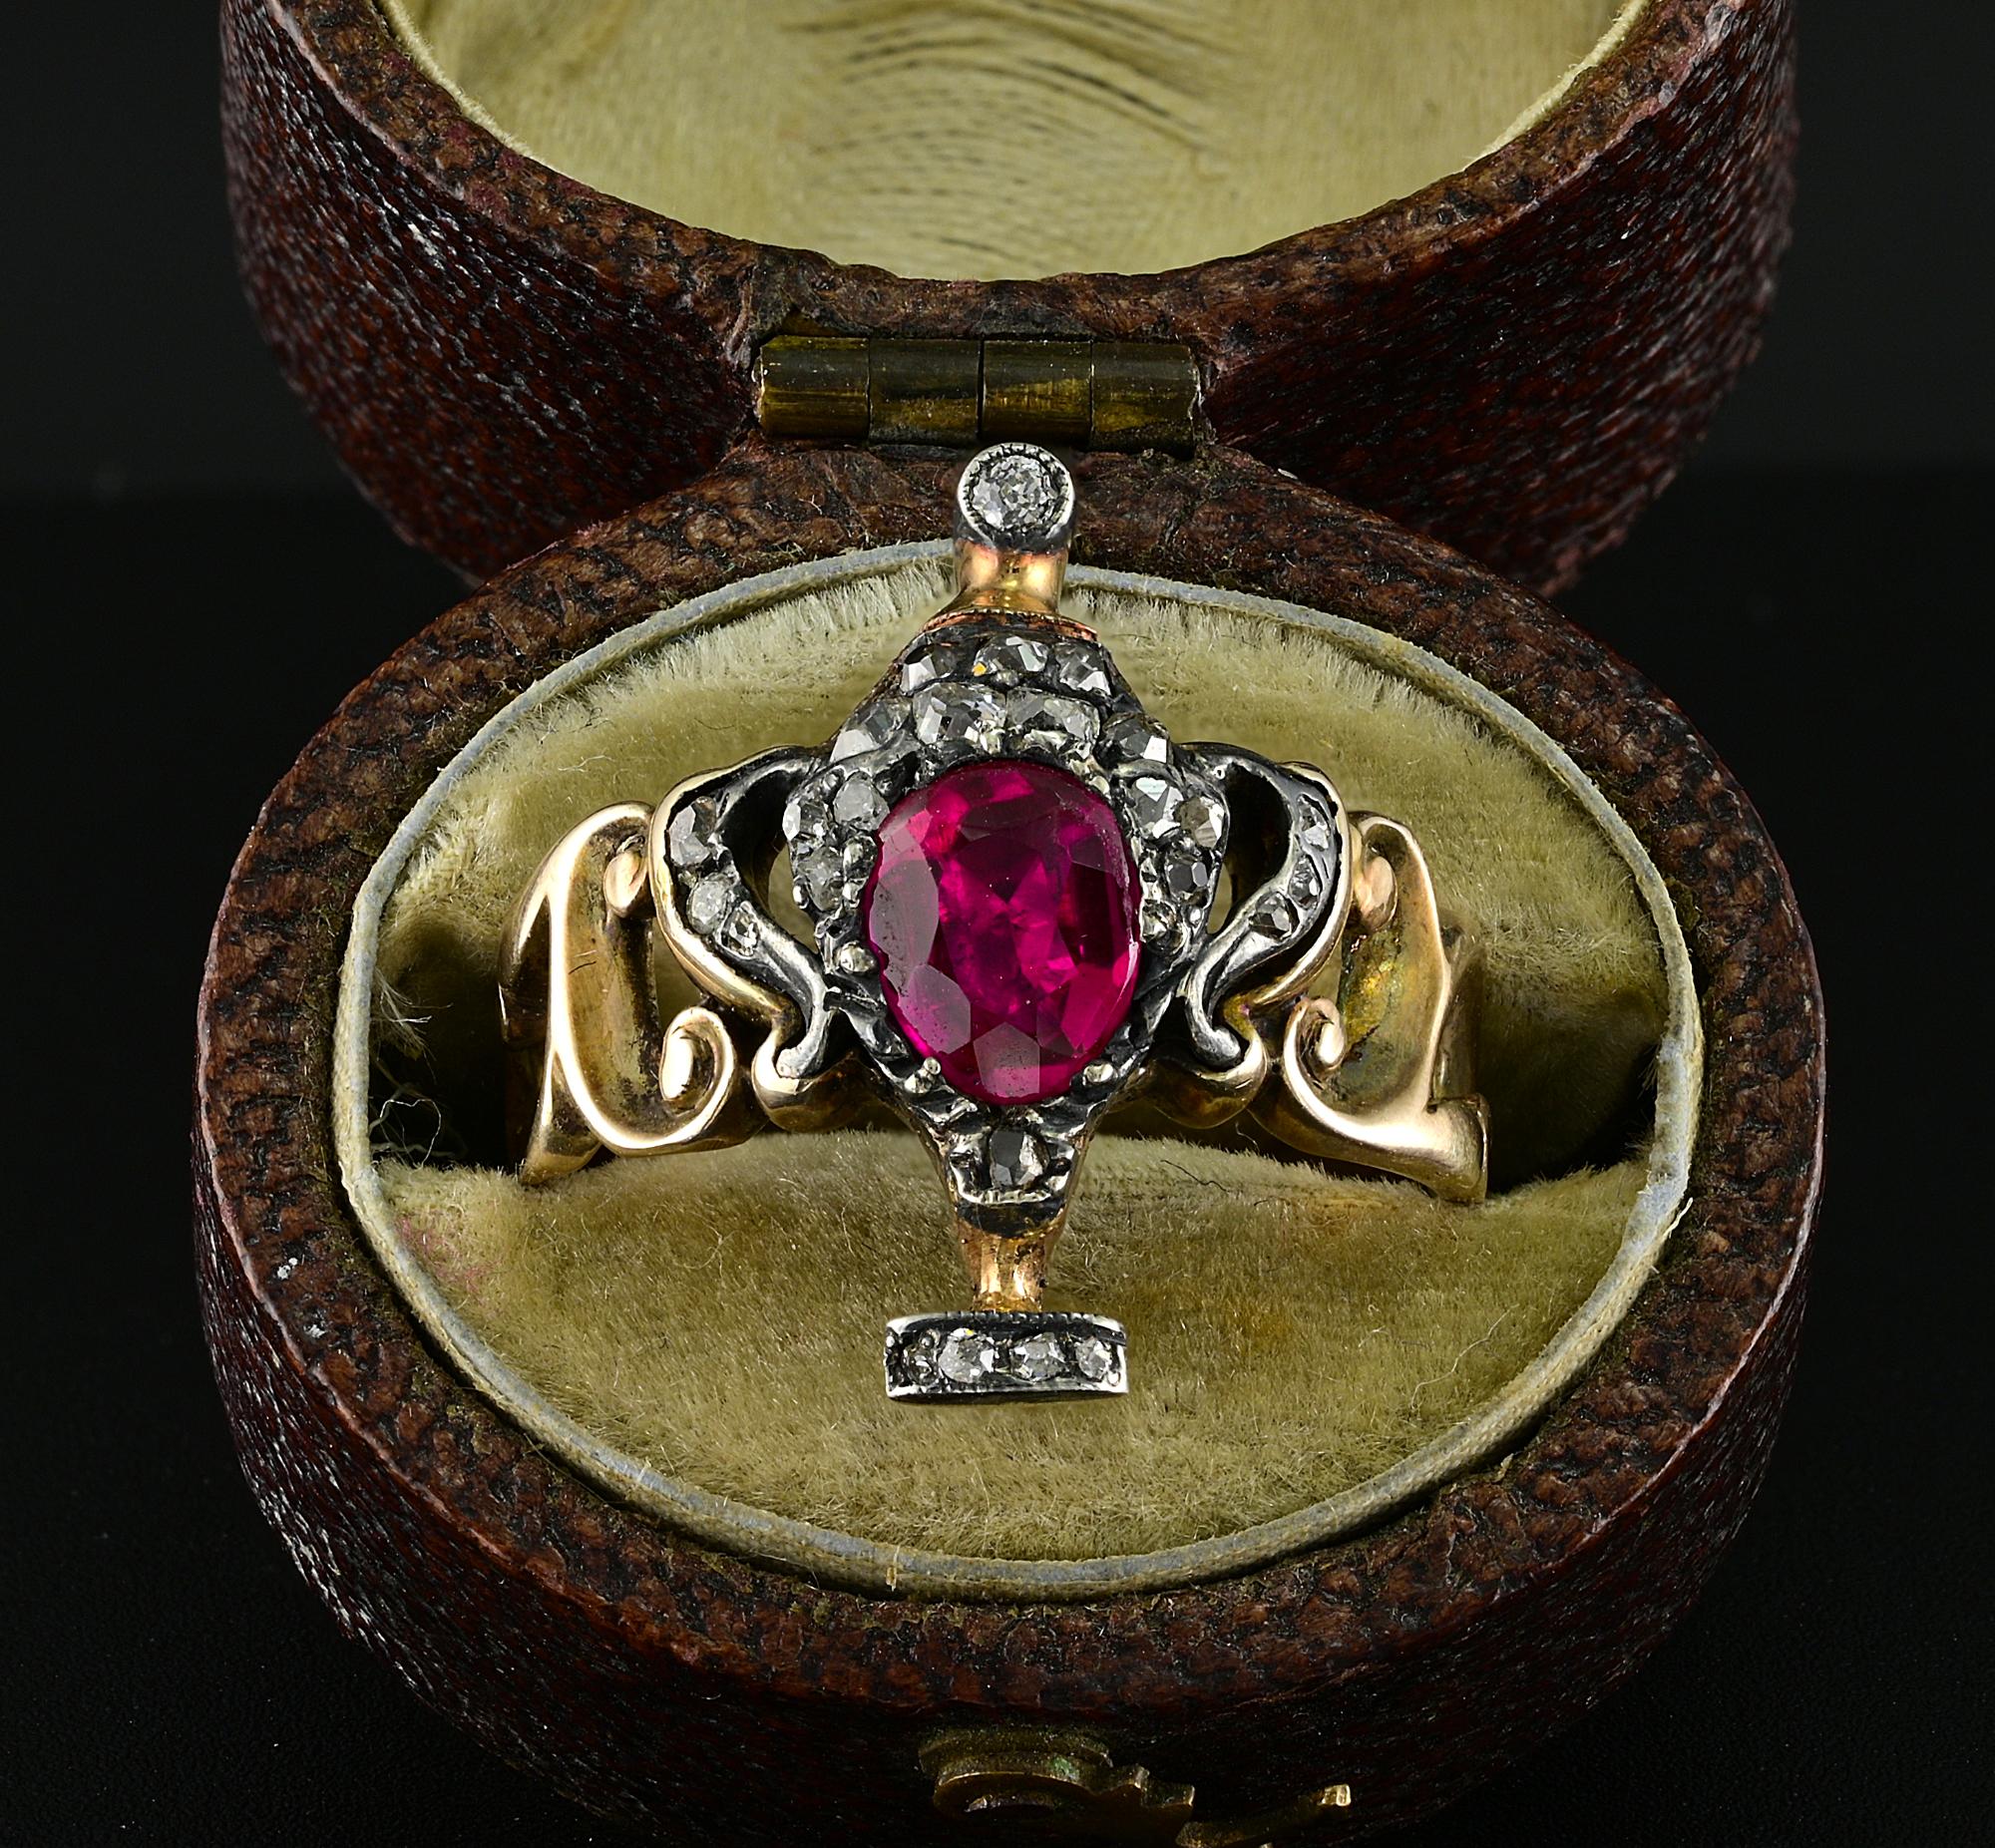 Magnificent Georgian period Urn ring set with natural untreated Ruby and Diamond, possibly Burma, in 18 KT and silver
Elaborate scroll work with the Urn in the middle beautifully adorned with 1 pear mine cut natural untreated Ruby of stunning color